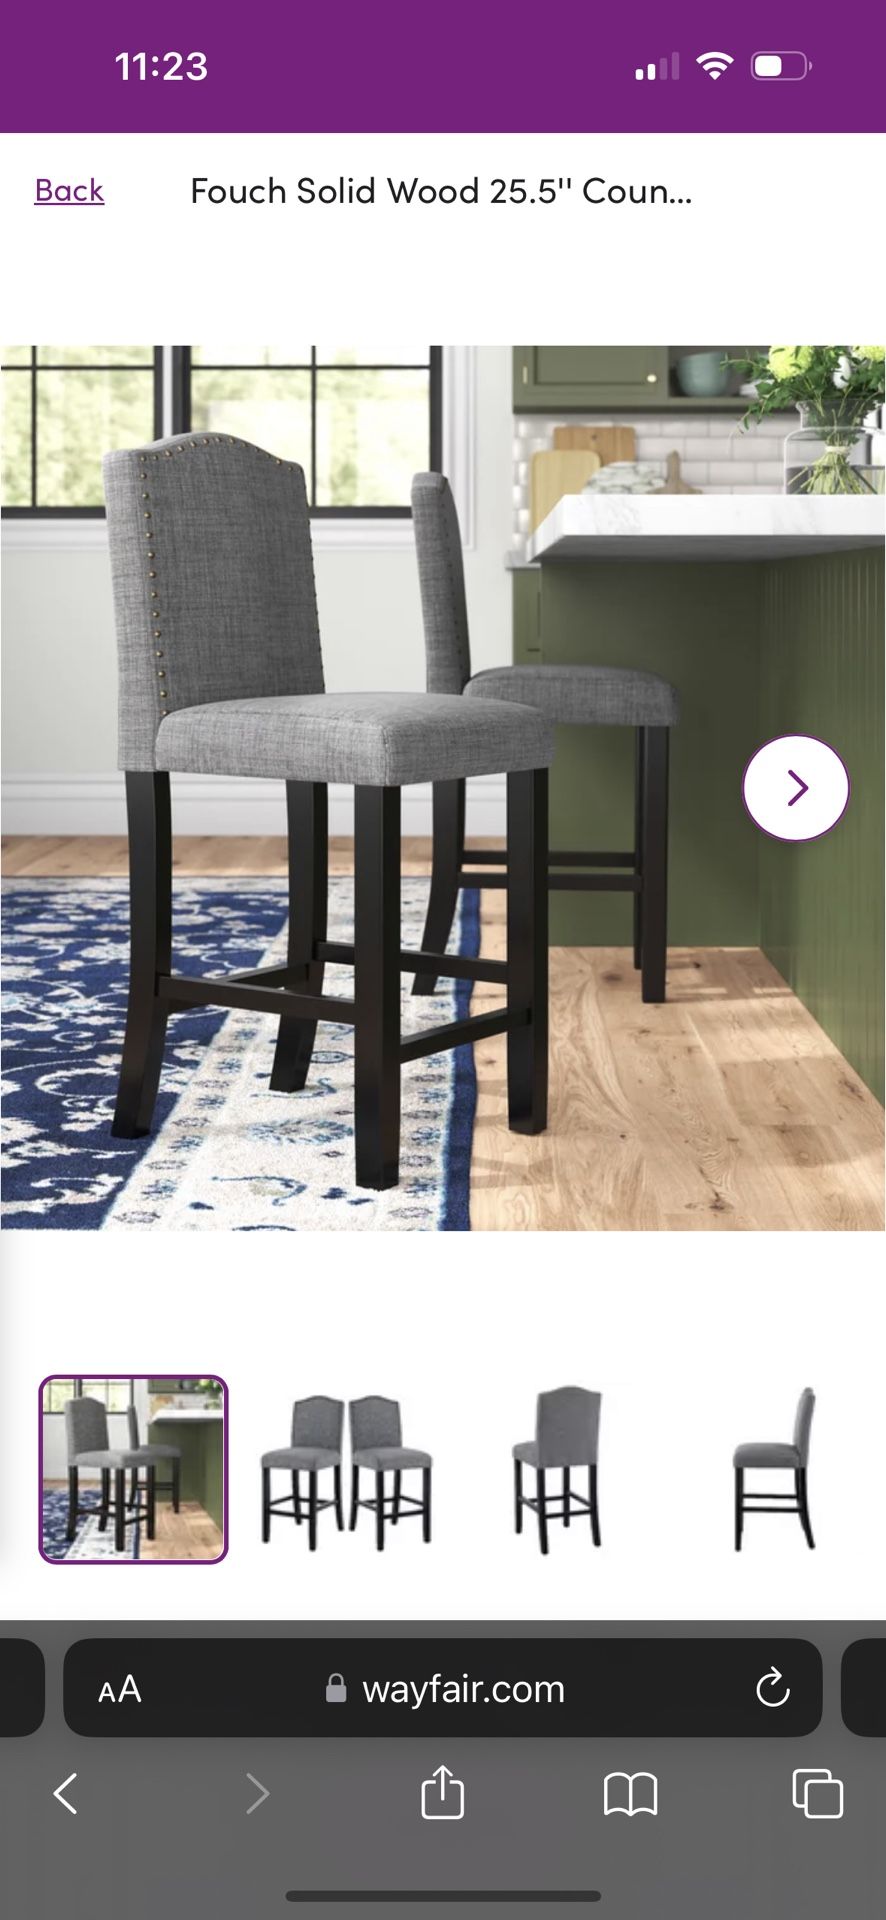 Fouch Solid Wood Chair Set